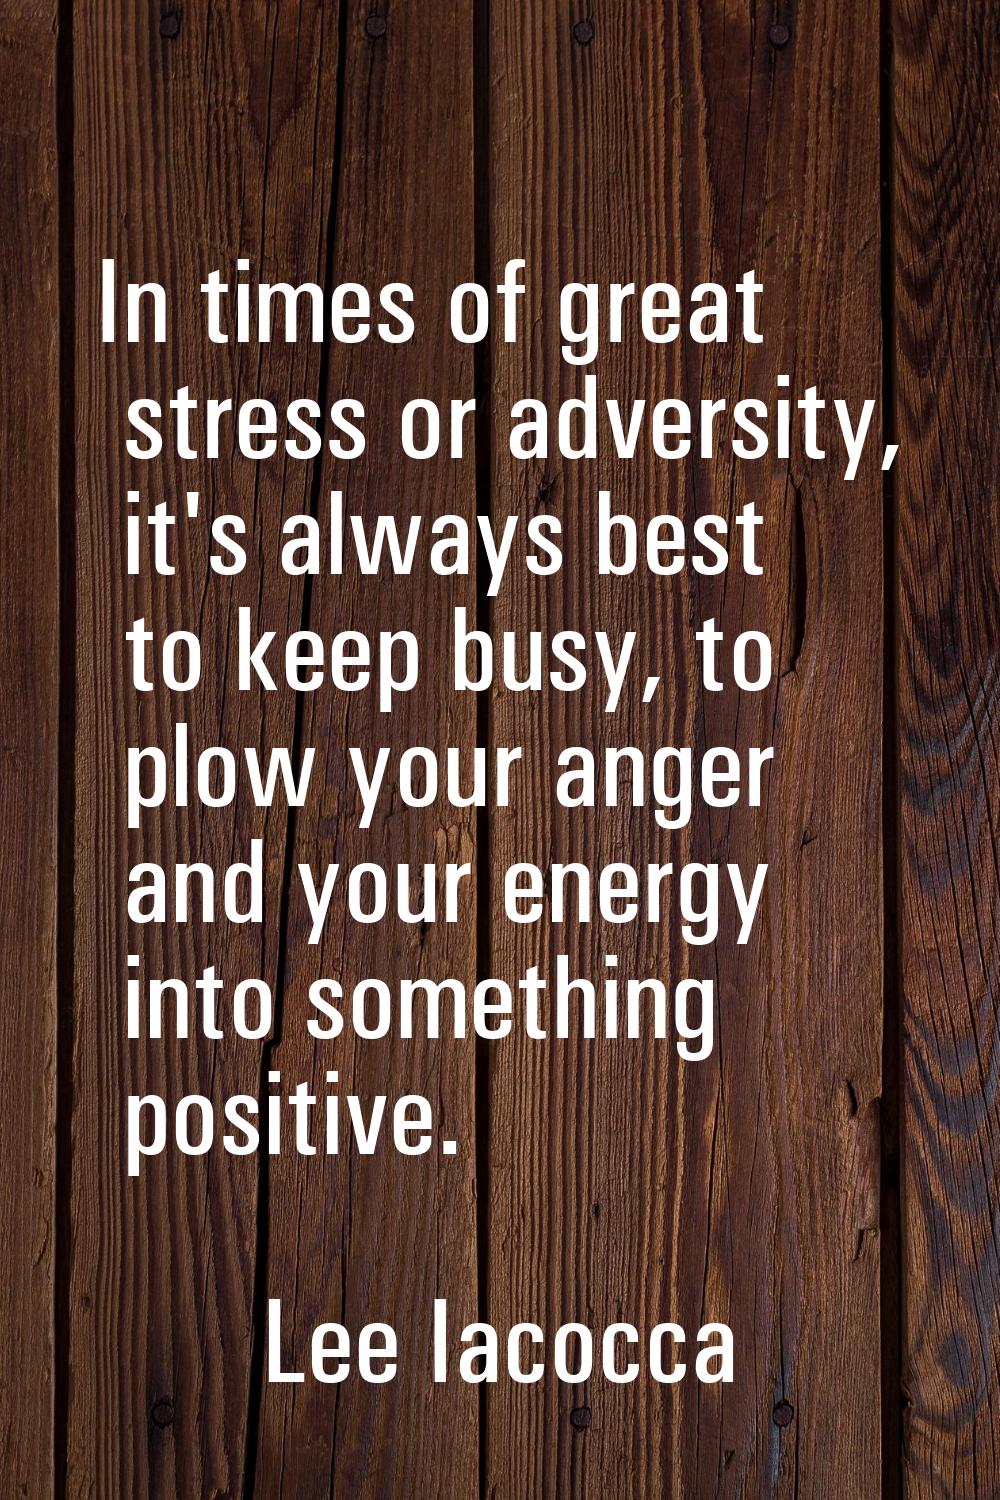 In times of great stress or adversity, it's always best to keep busy, to plow your anger and your e